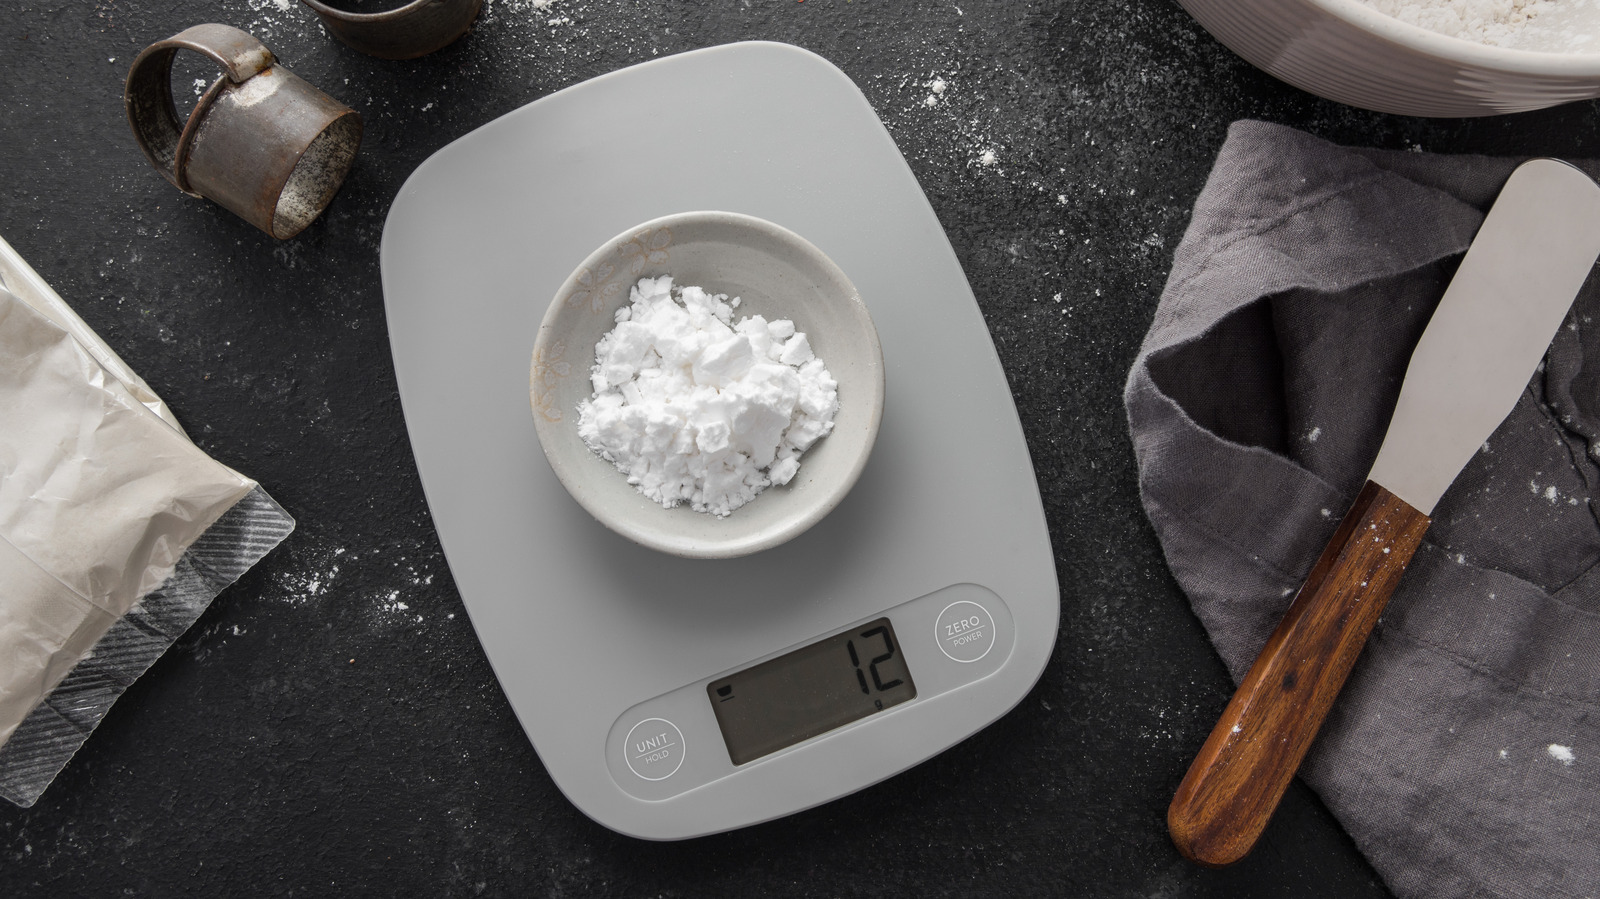 Volume and Weight Scale - King Arthur Baking Company